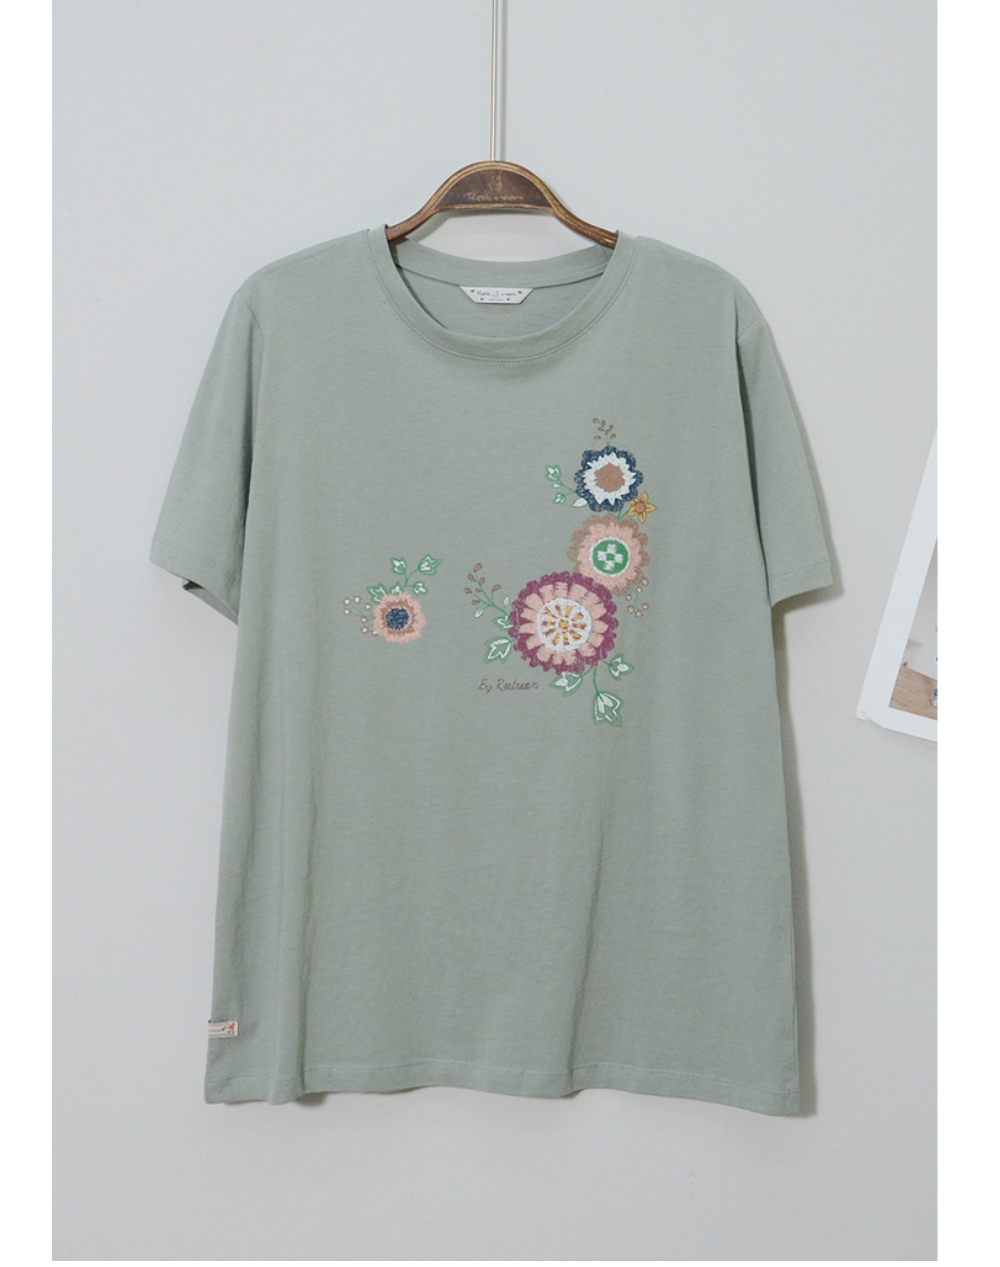 short sleeved tee grey color image-S5L14